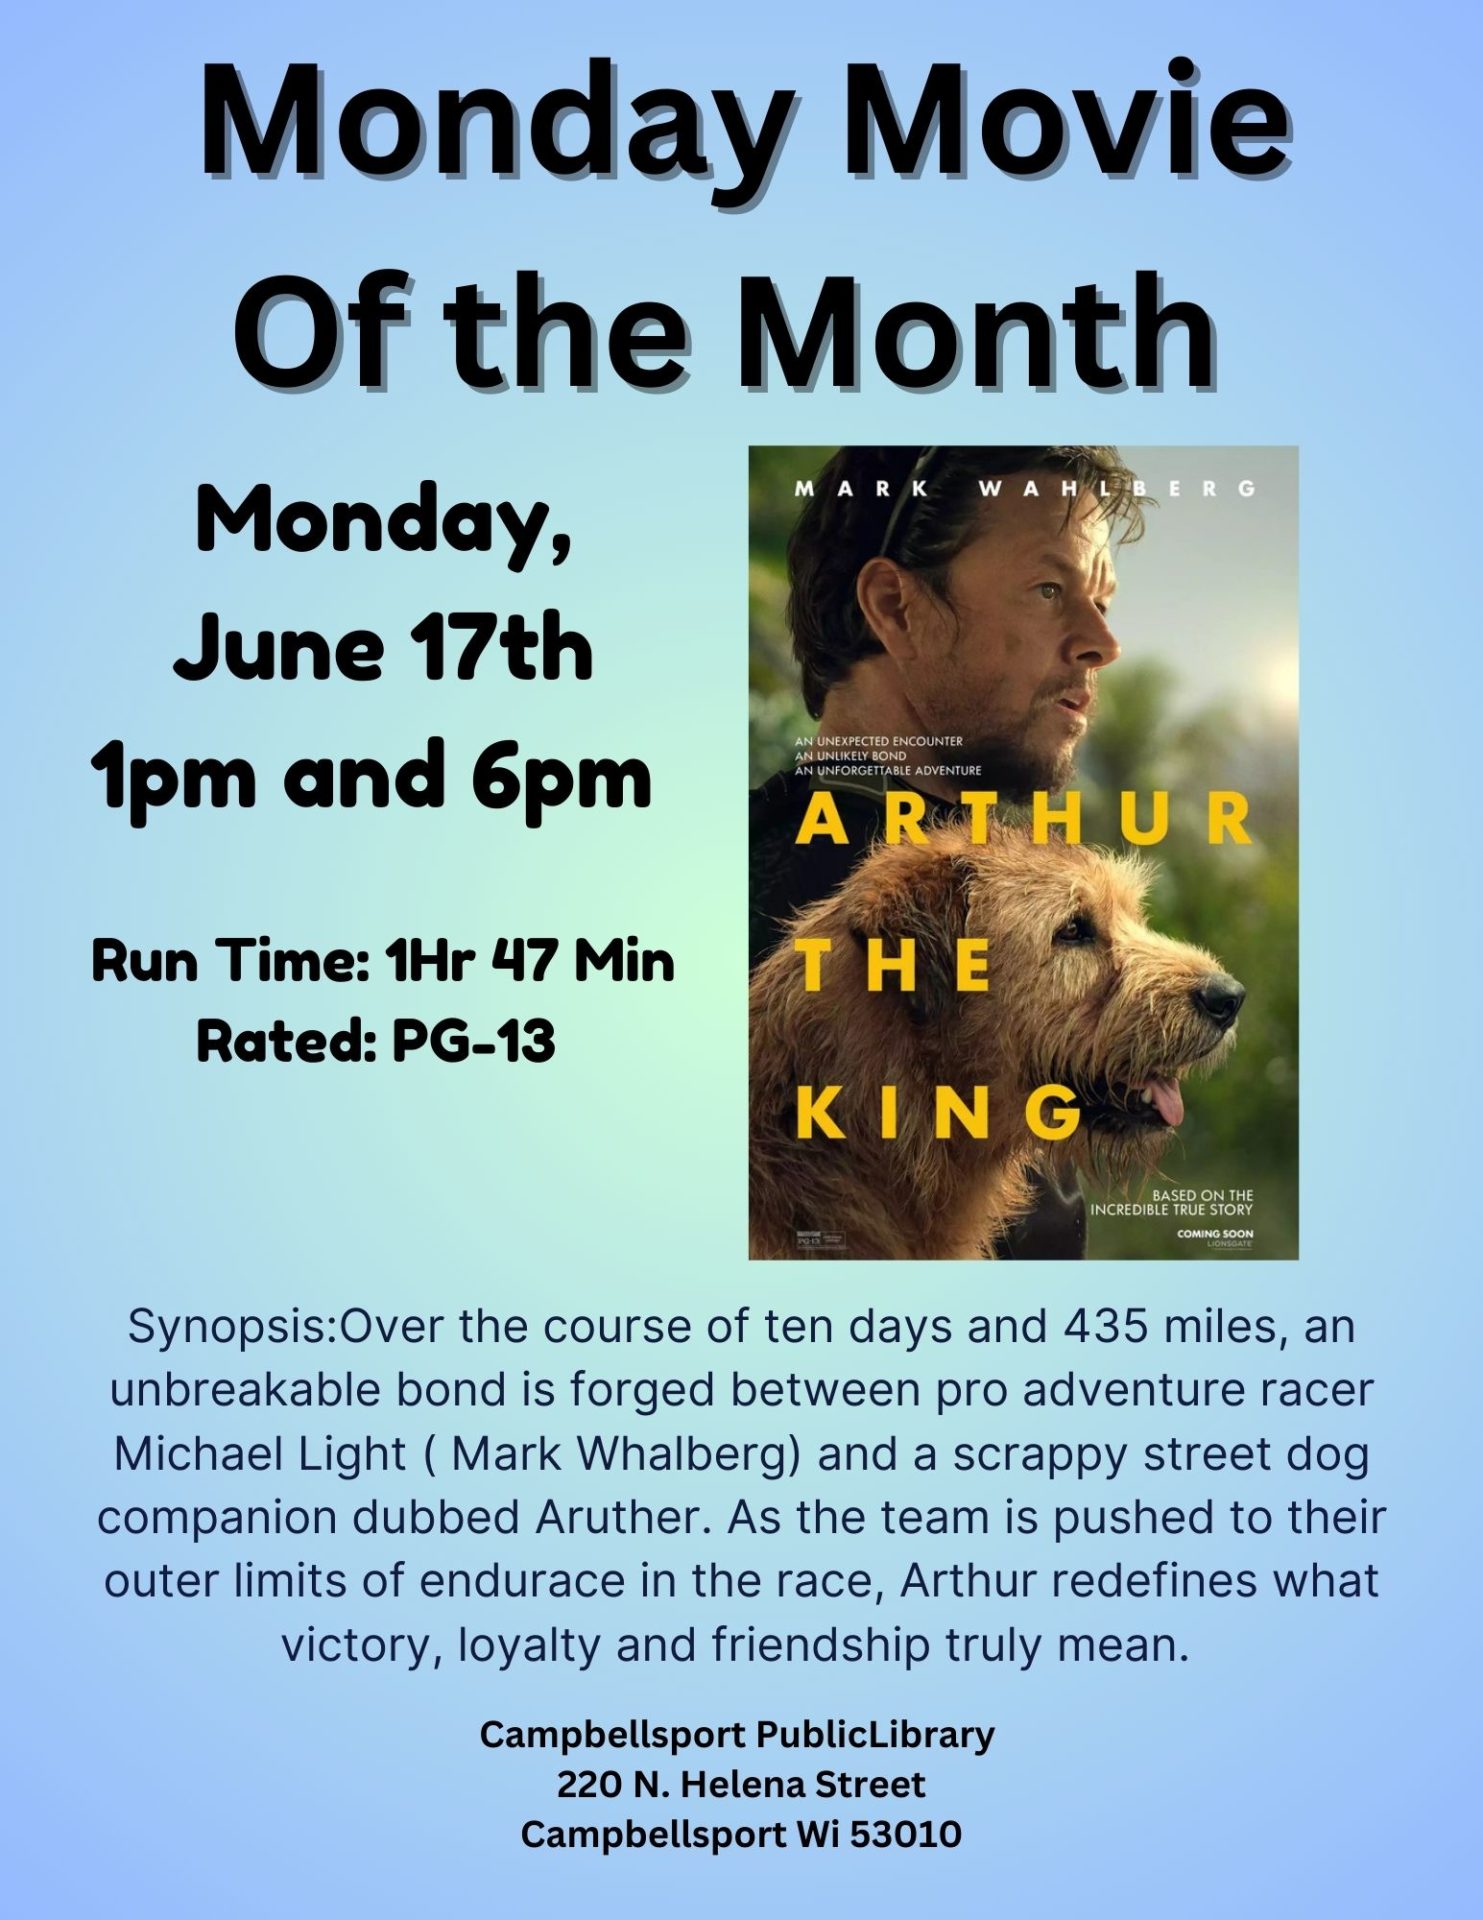 Monday Movie of the Month: Arthur the King